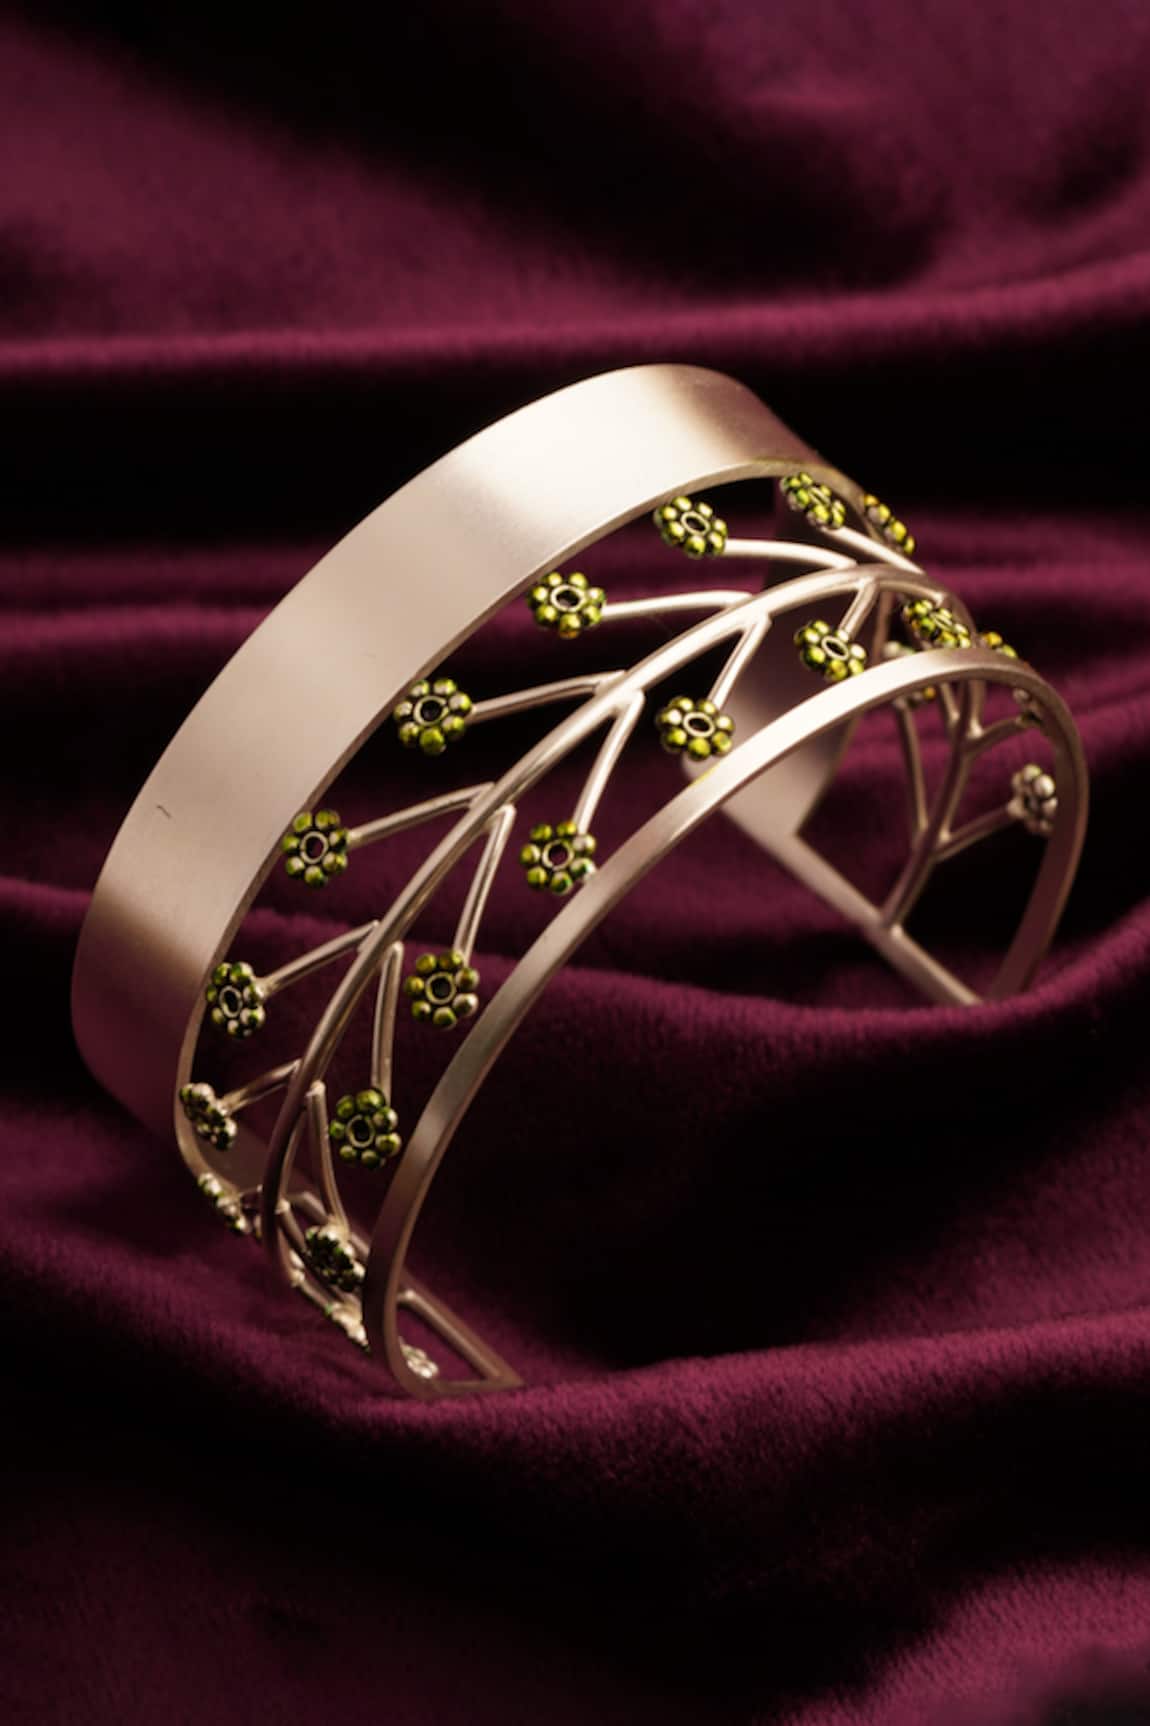 SUHANI PITTIE Moon Mettle Floral Carved Cutwork Cuff